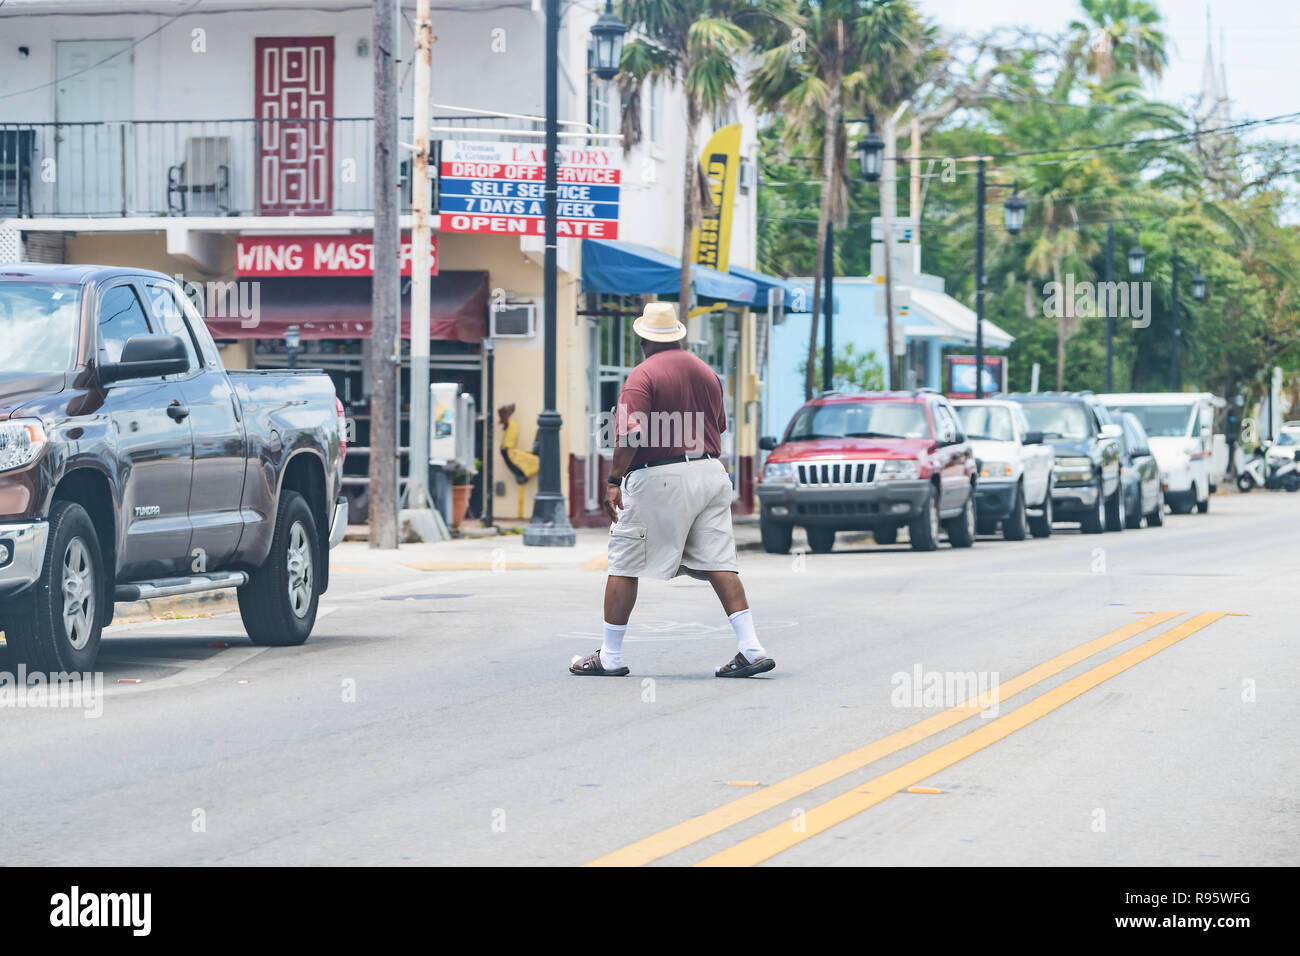 Key West, USA - May 1, 2018: Truman Avenue in Florida keys city, urban view on street, road, cars, laundry store with African American man crossing, j Stock Photo